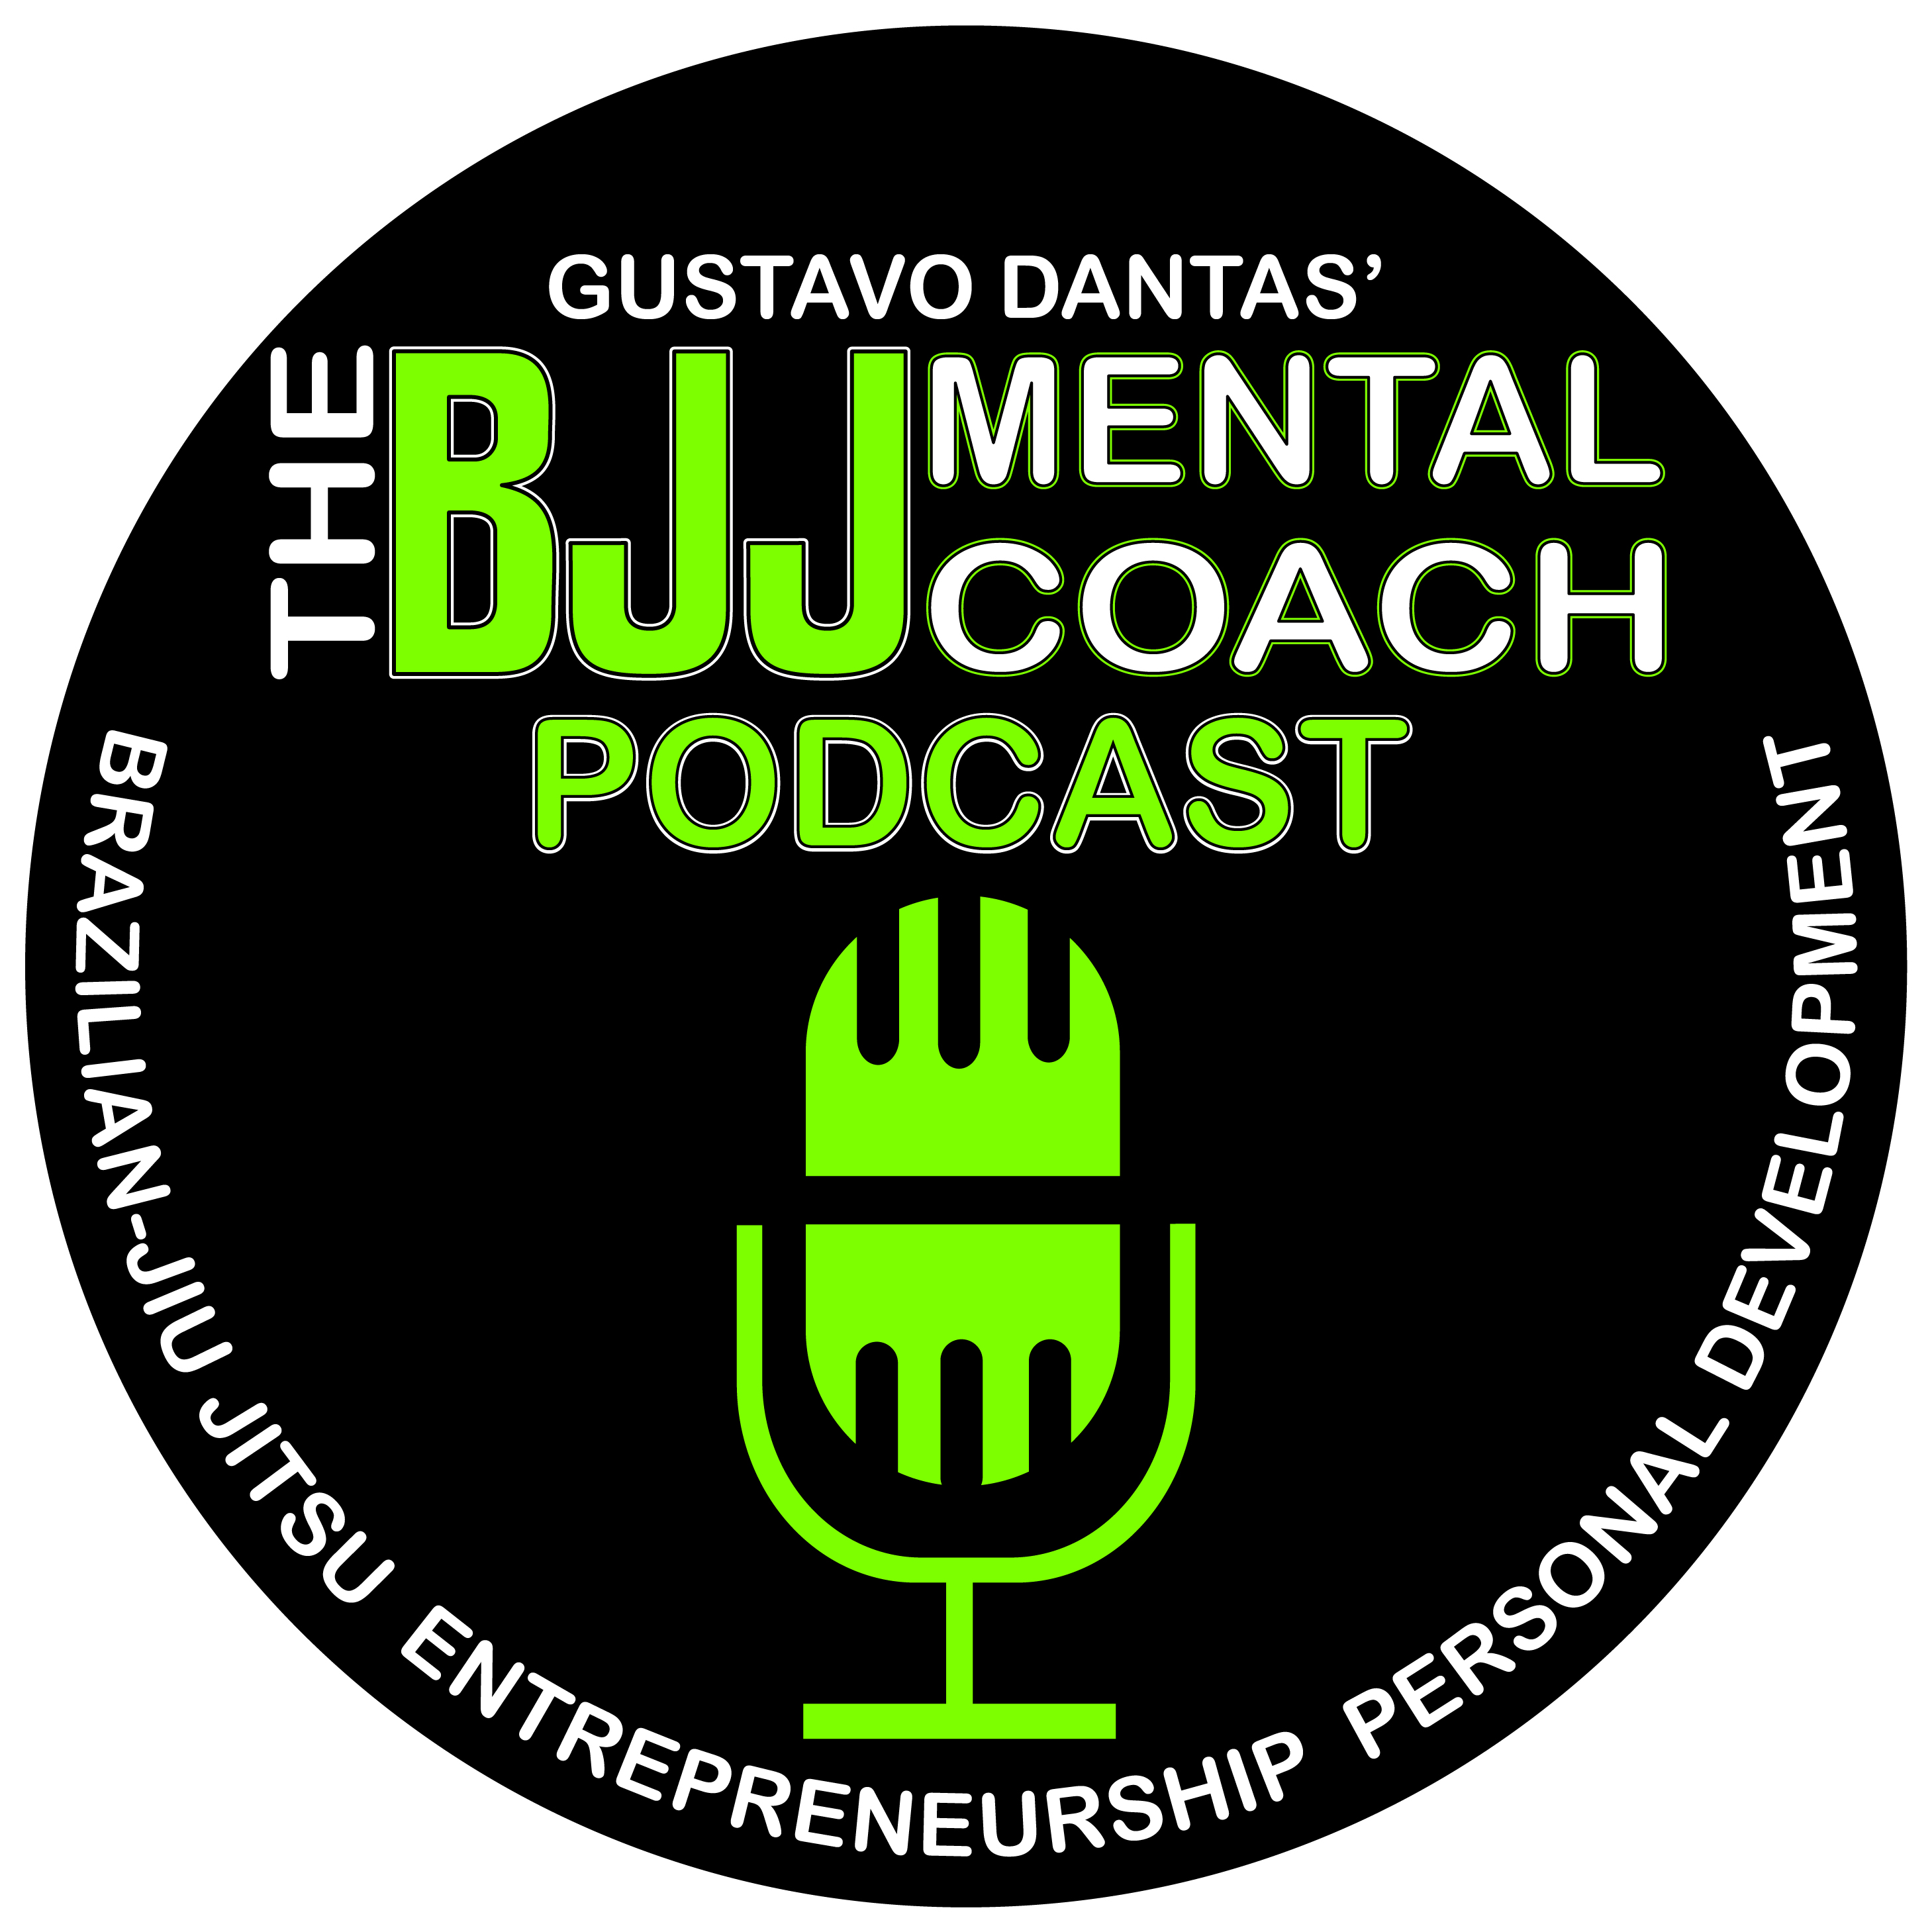 Artwork for podcast The BJJ Mental Coach Podcast with Gustavo Dantas